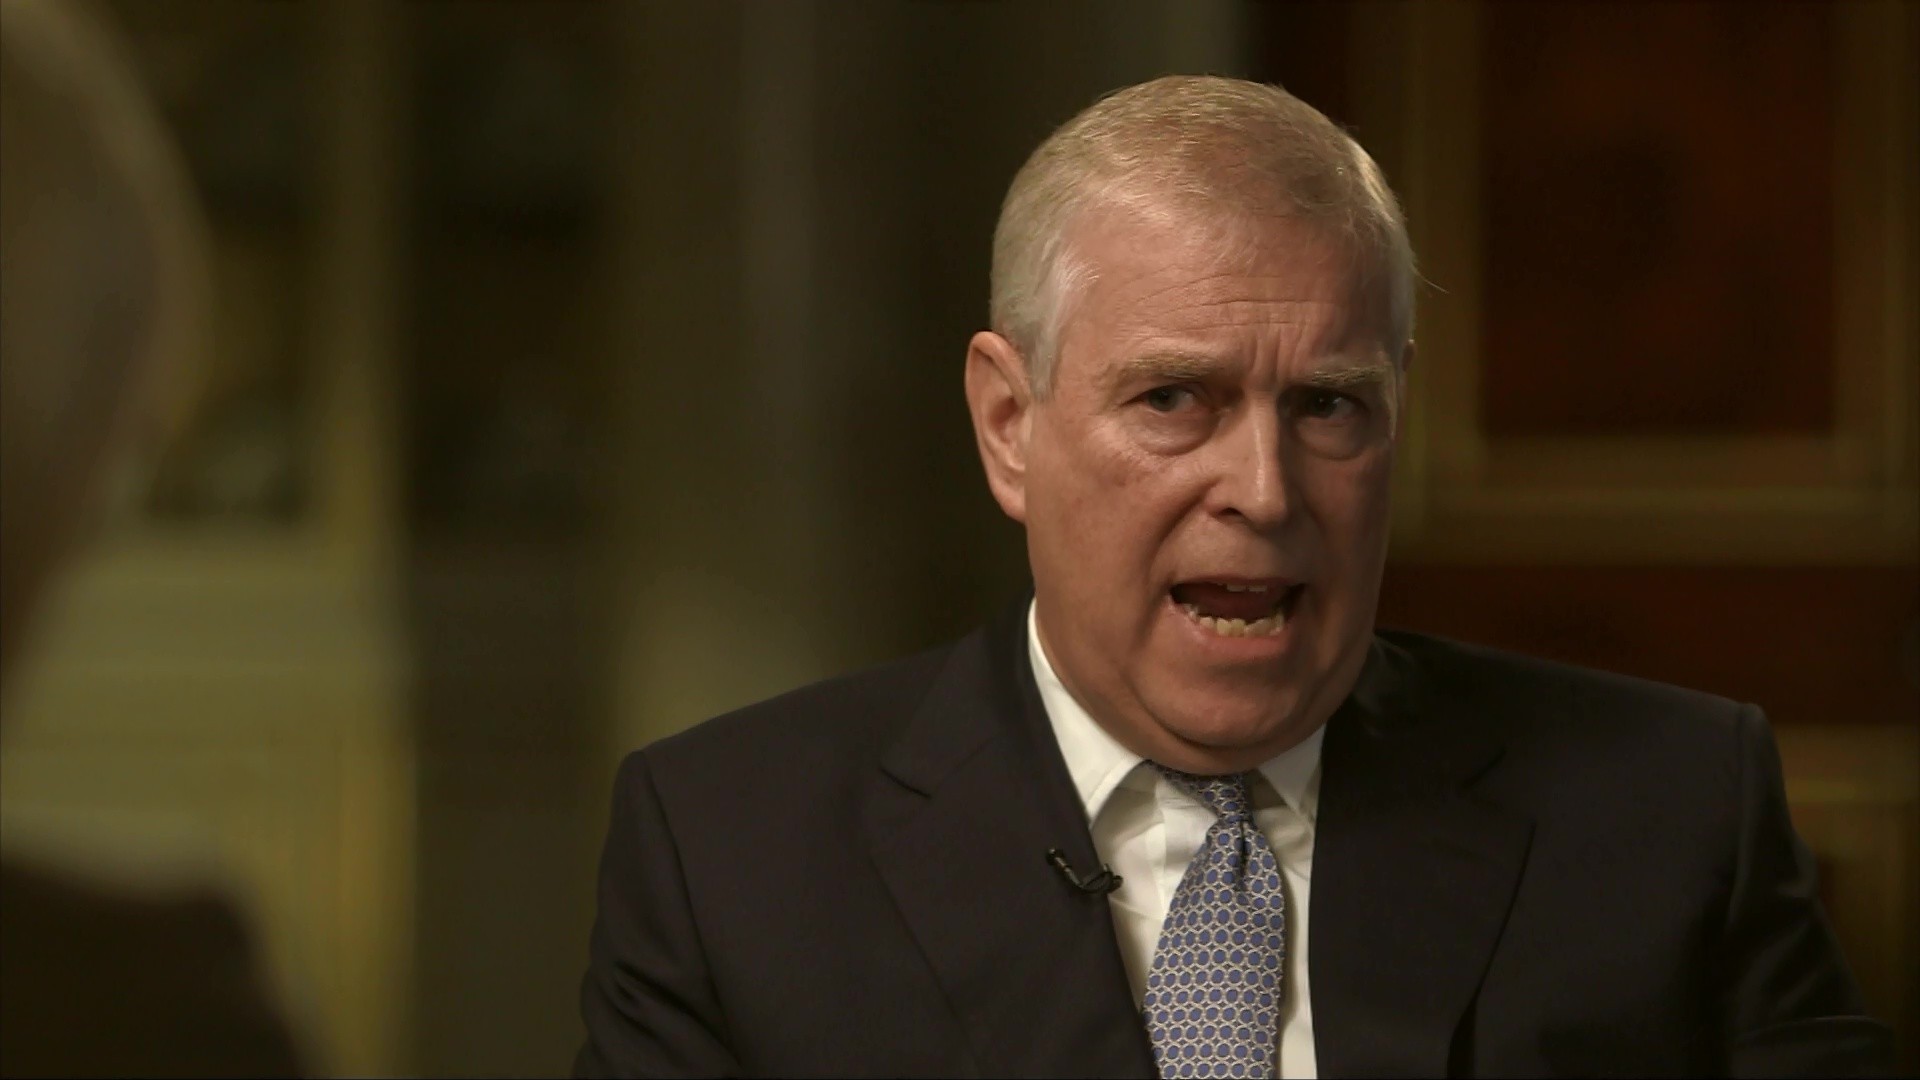 Prince Andrew did not express sympathy to the victims of Epstein